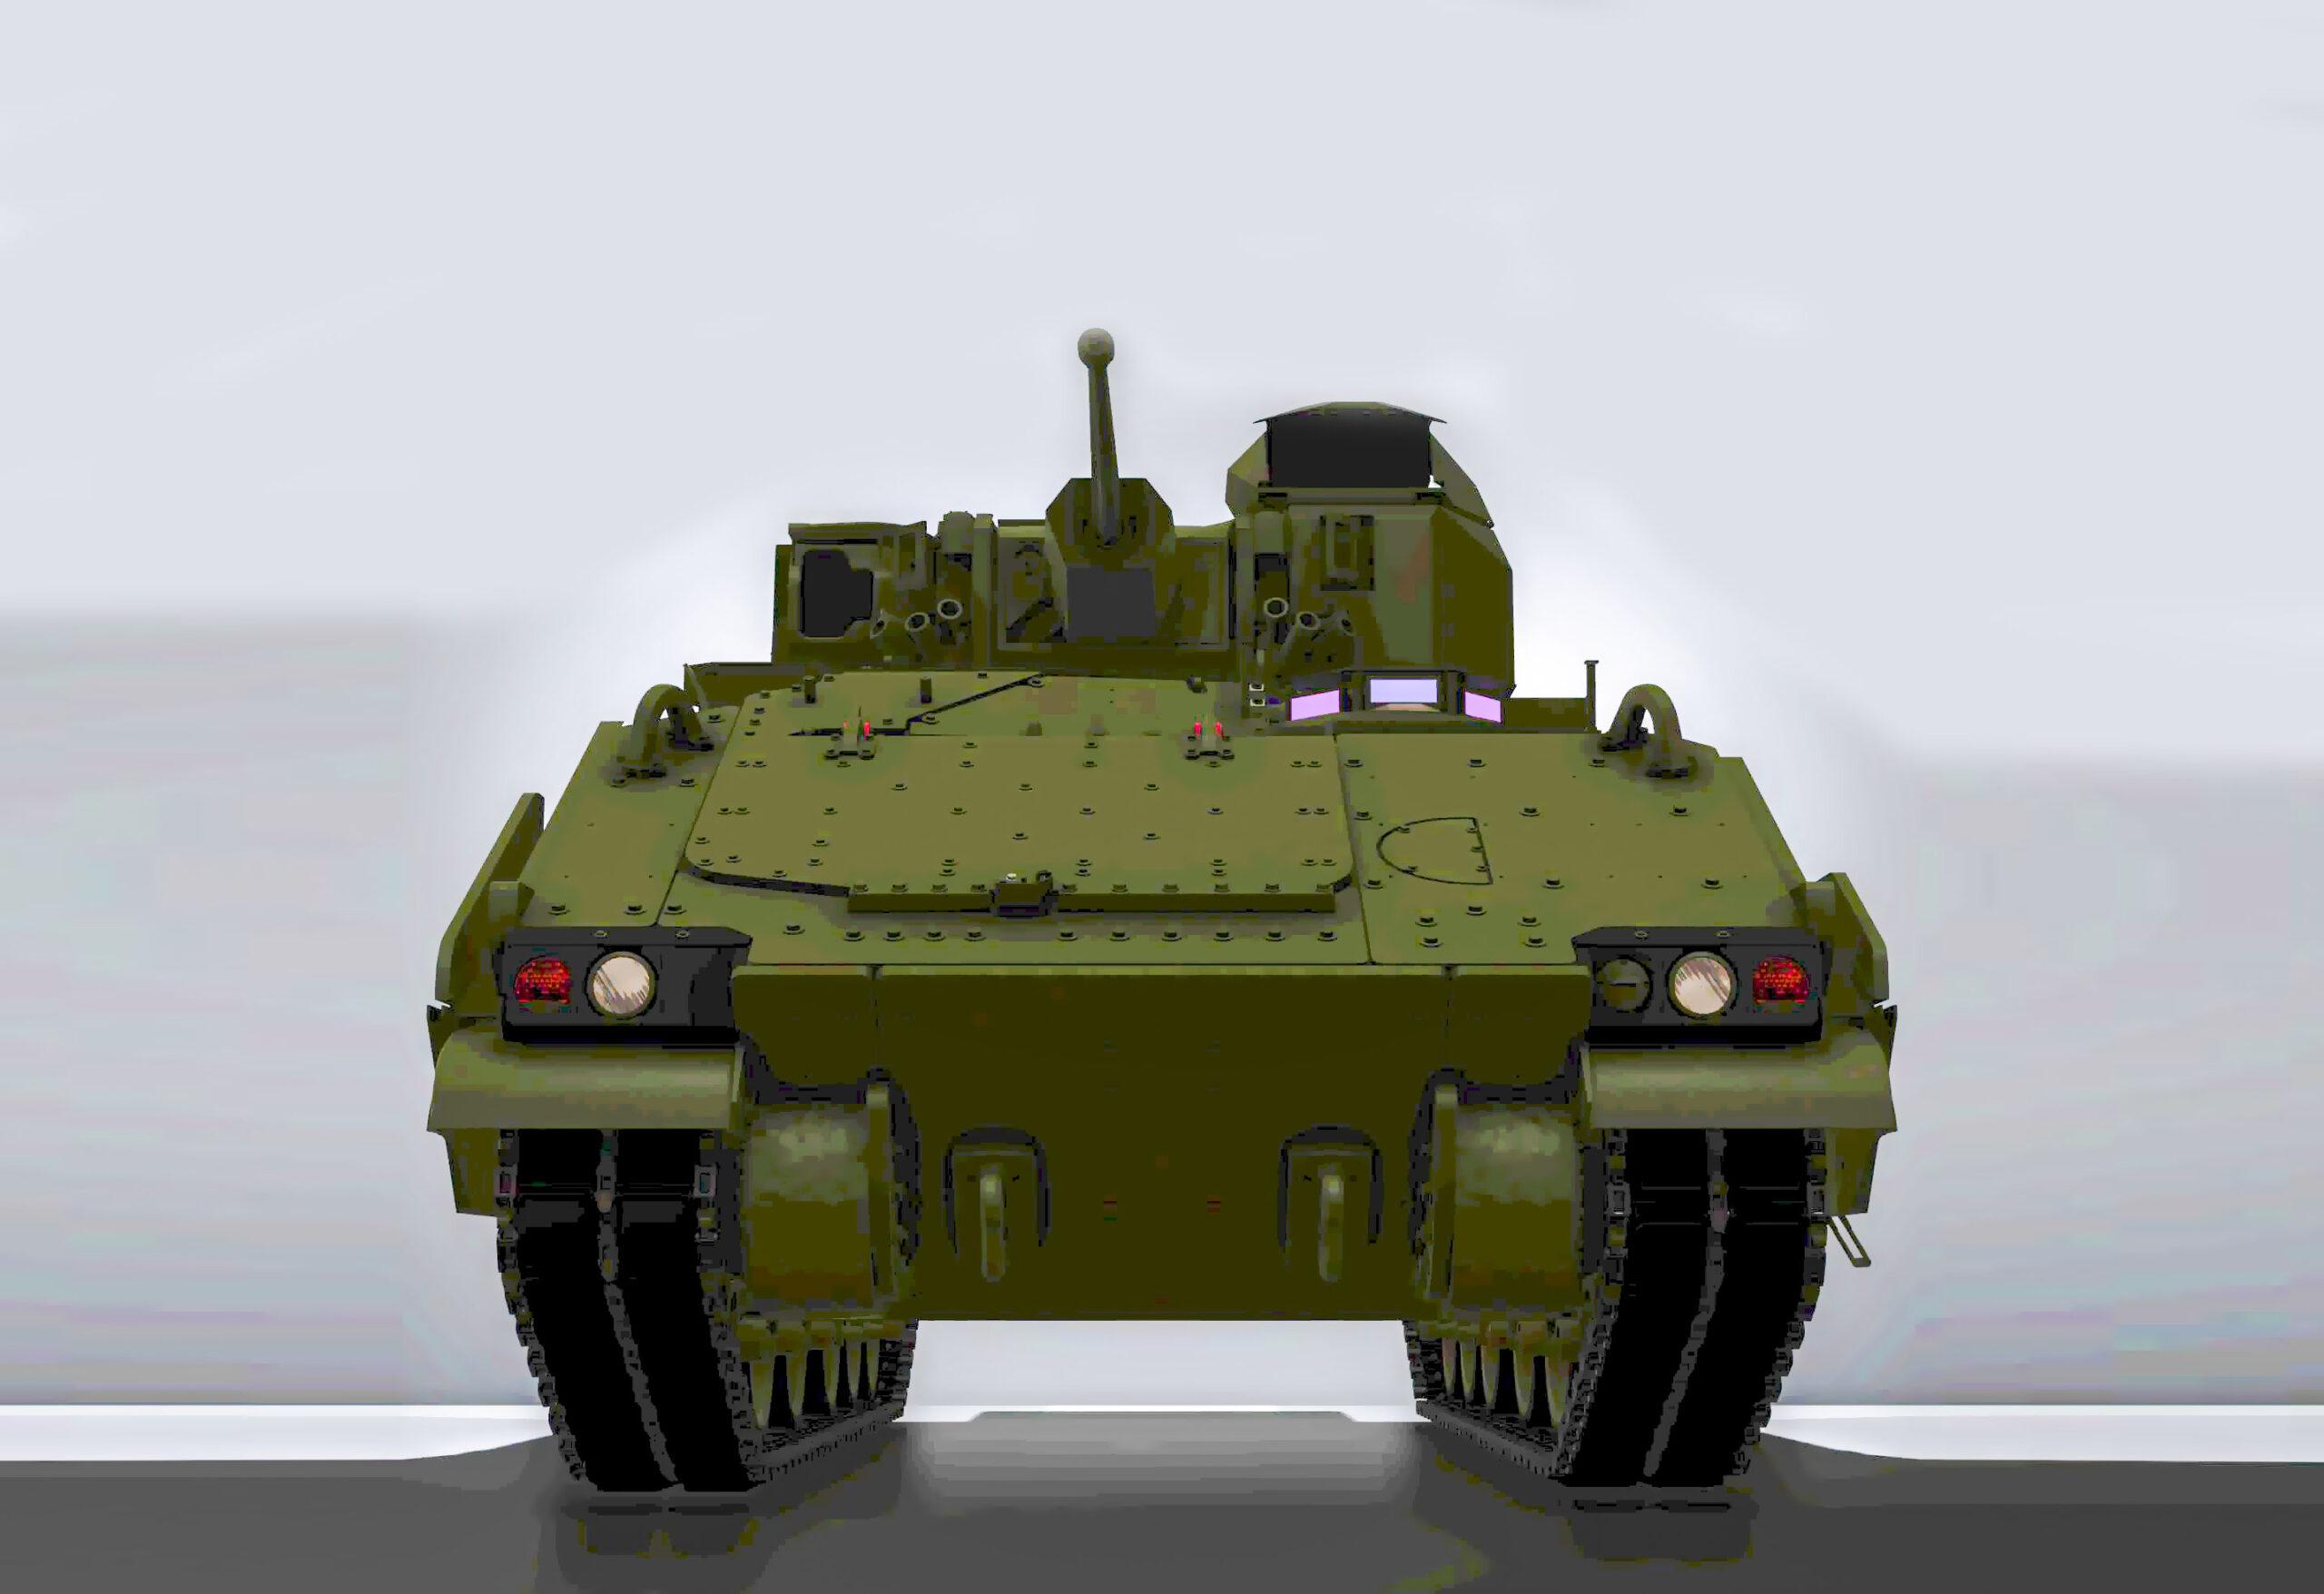 BAE Systems Submit Bids for US Army Optionally Manned Fighting Vehicle (OMFV) Programme